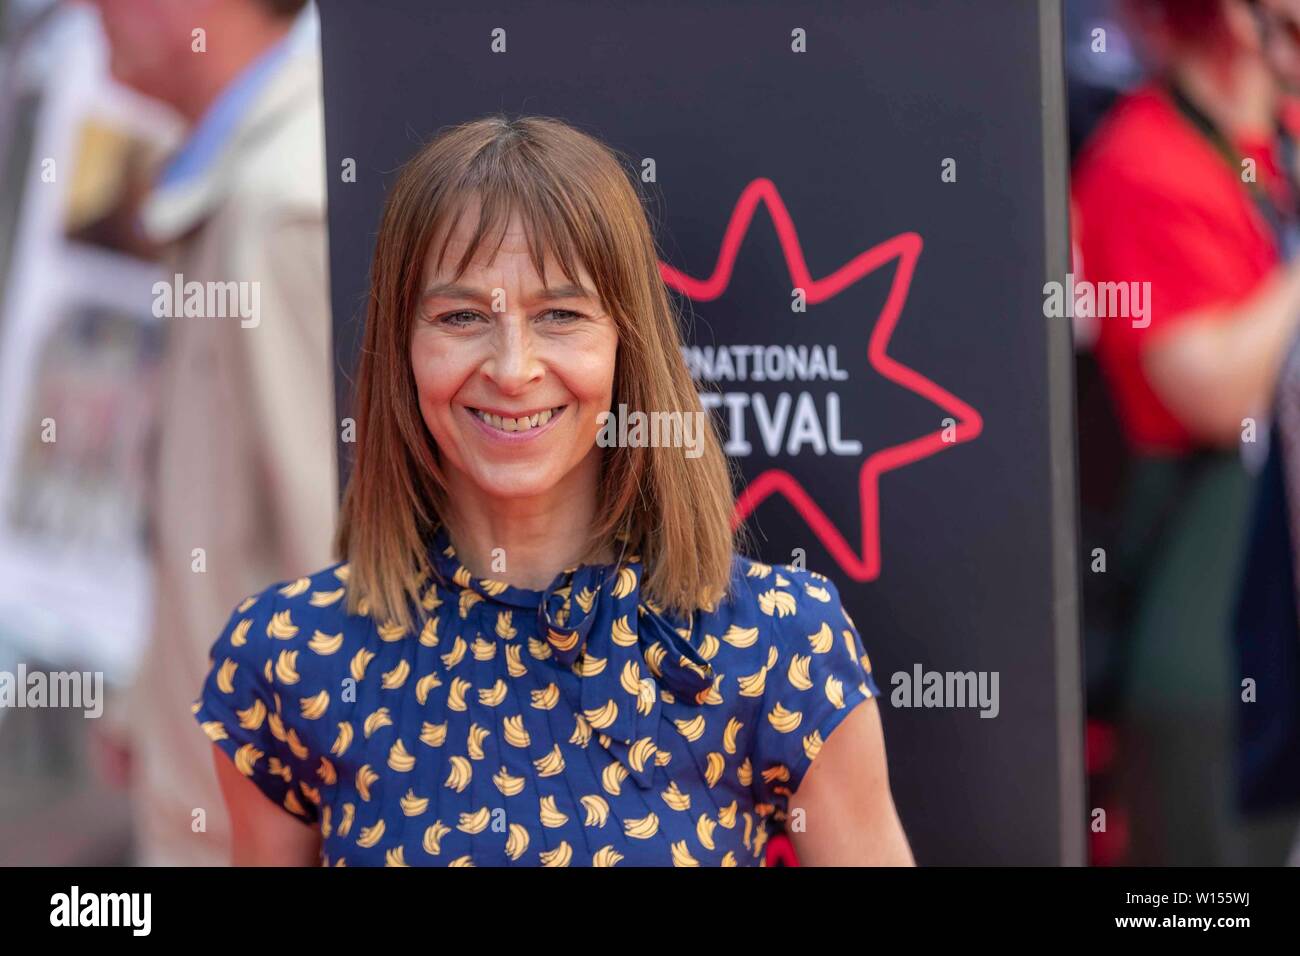 Edinburgh, UK. 30th June, 2019. The 2019 Edinburgh International Film Festival is brought to a close with the World Premiere of Mrs Lowry & Son starring Venessa Redgrave & Timothy Spall. Pictured: Kate Dickie Credit: Rich Dyson/Alamy Live News Stock Photo